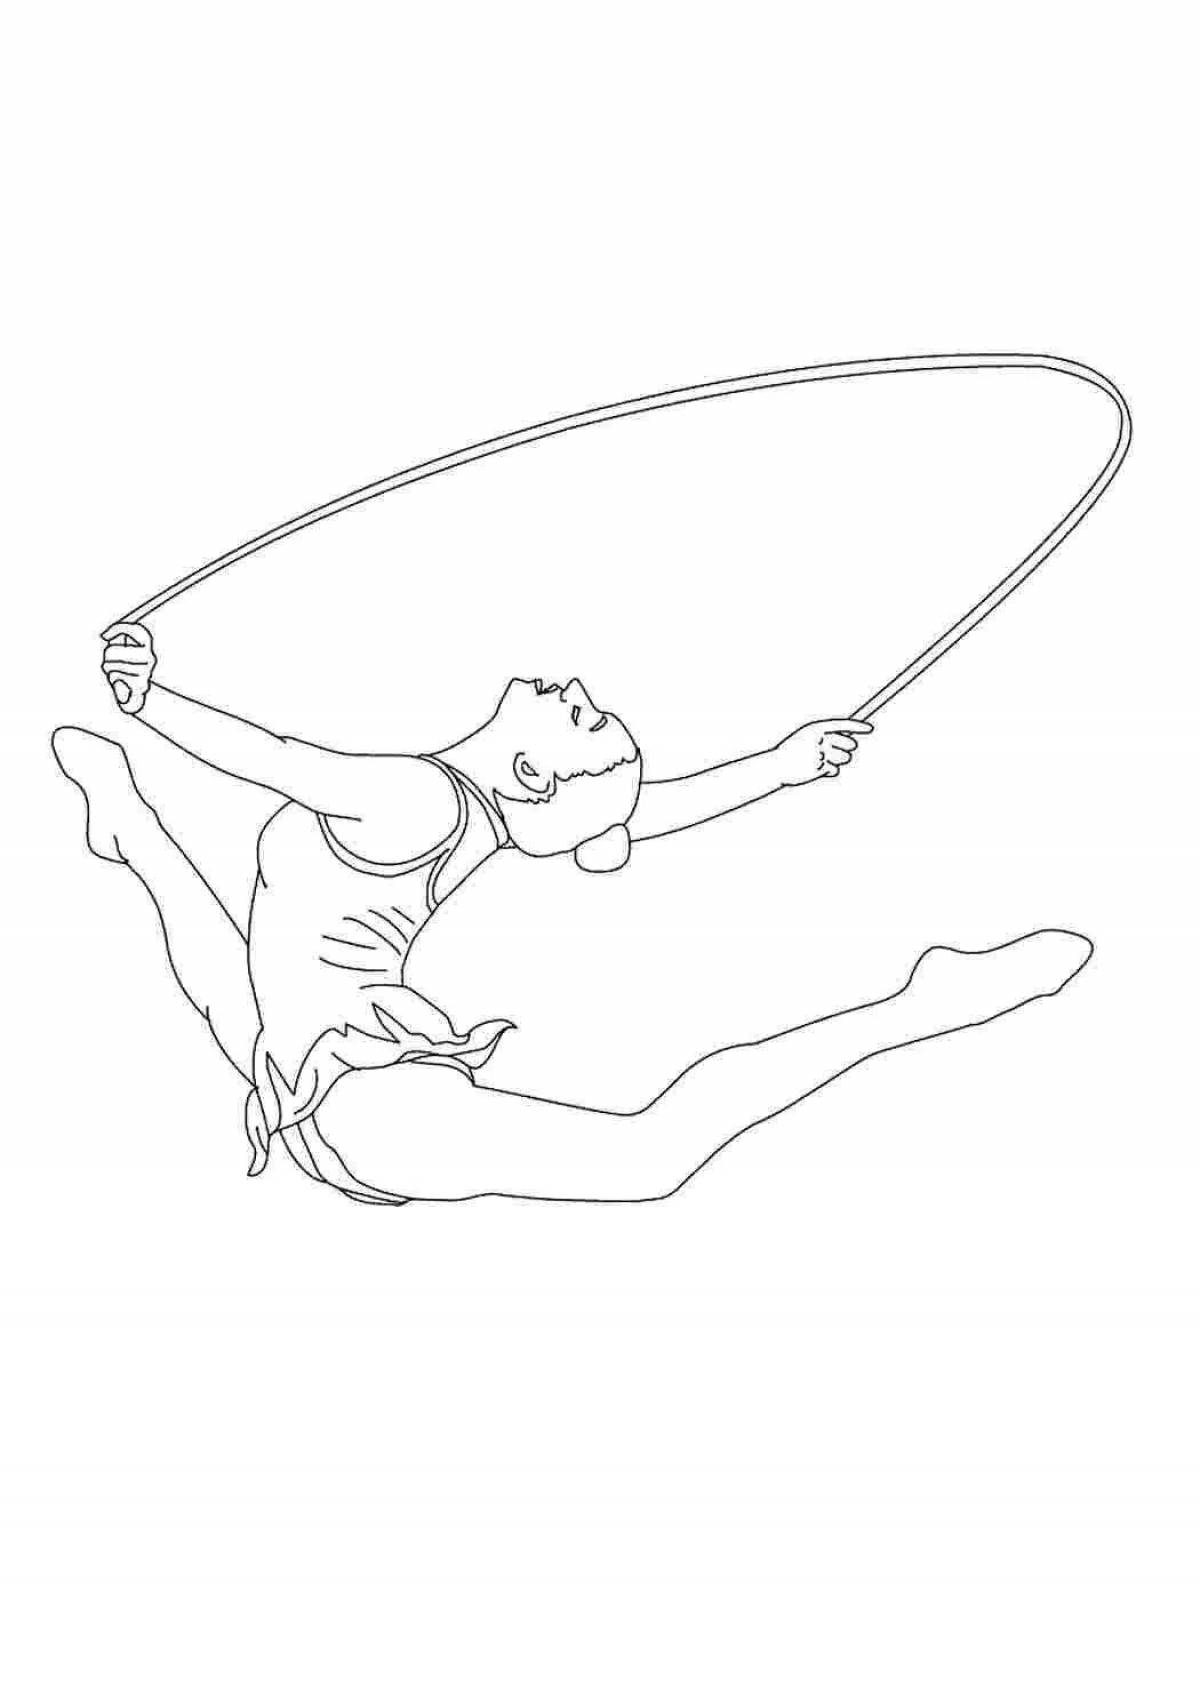 Live gymnast coloring book for kids